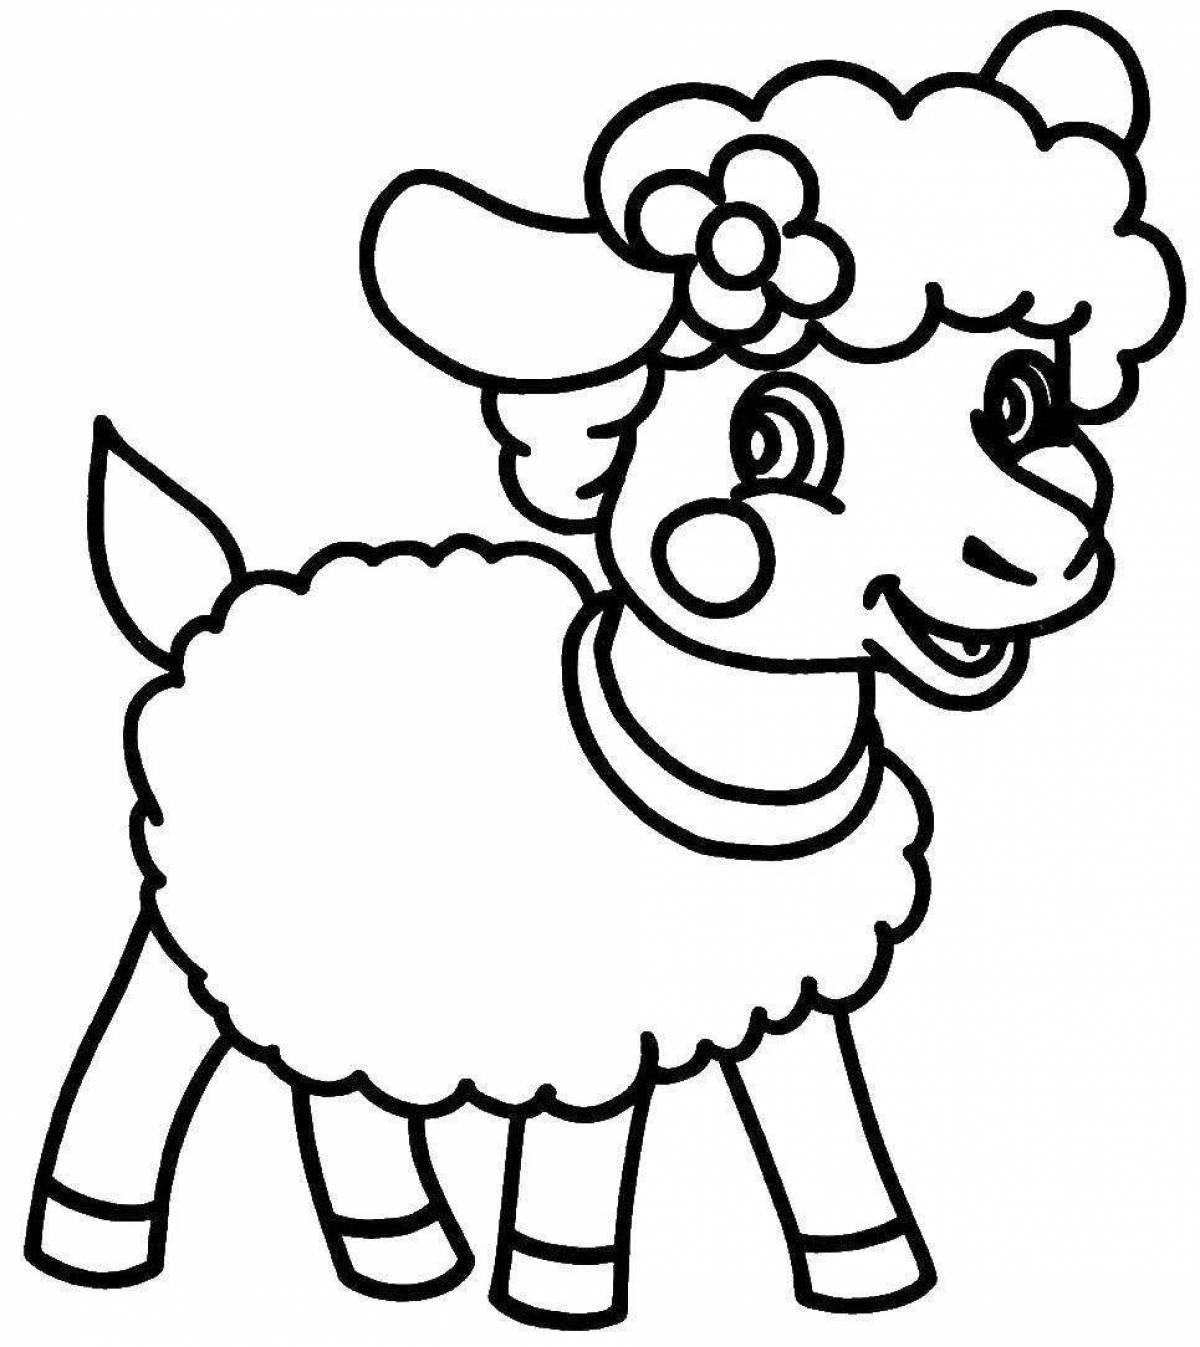 Silly lamb coloring book for 2-3 year olds